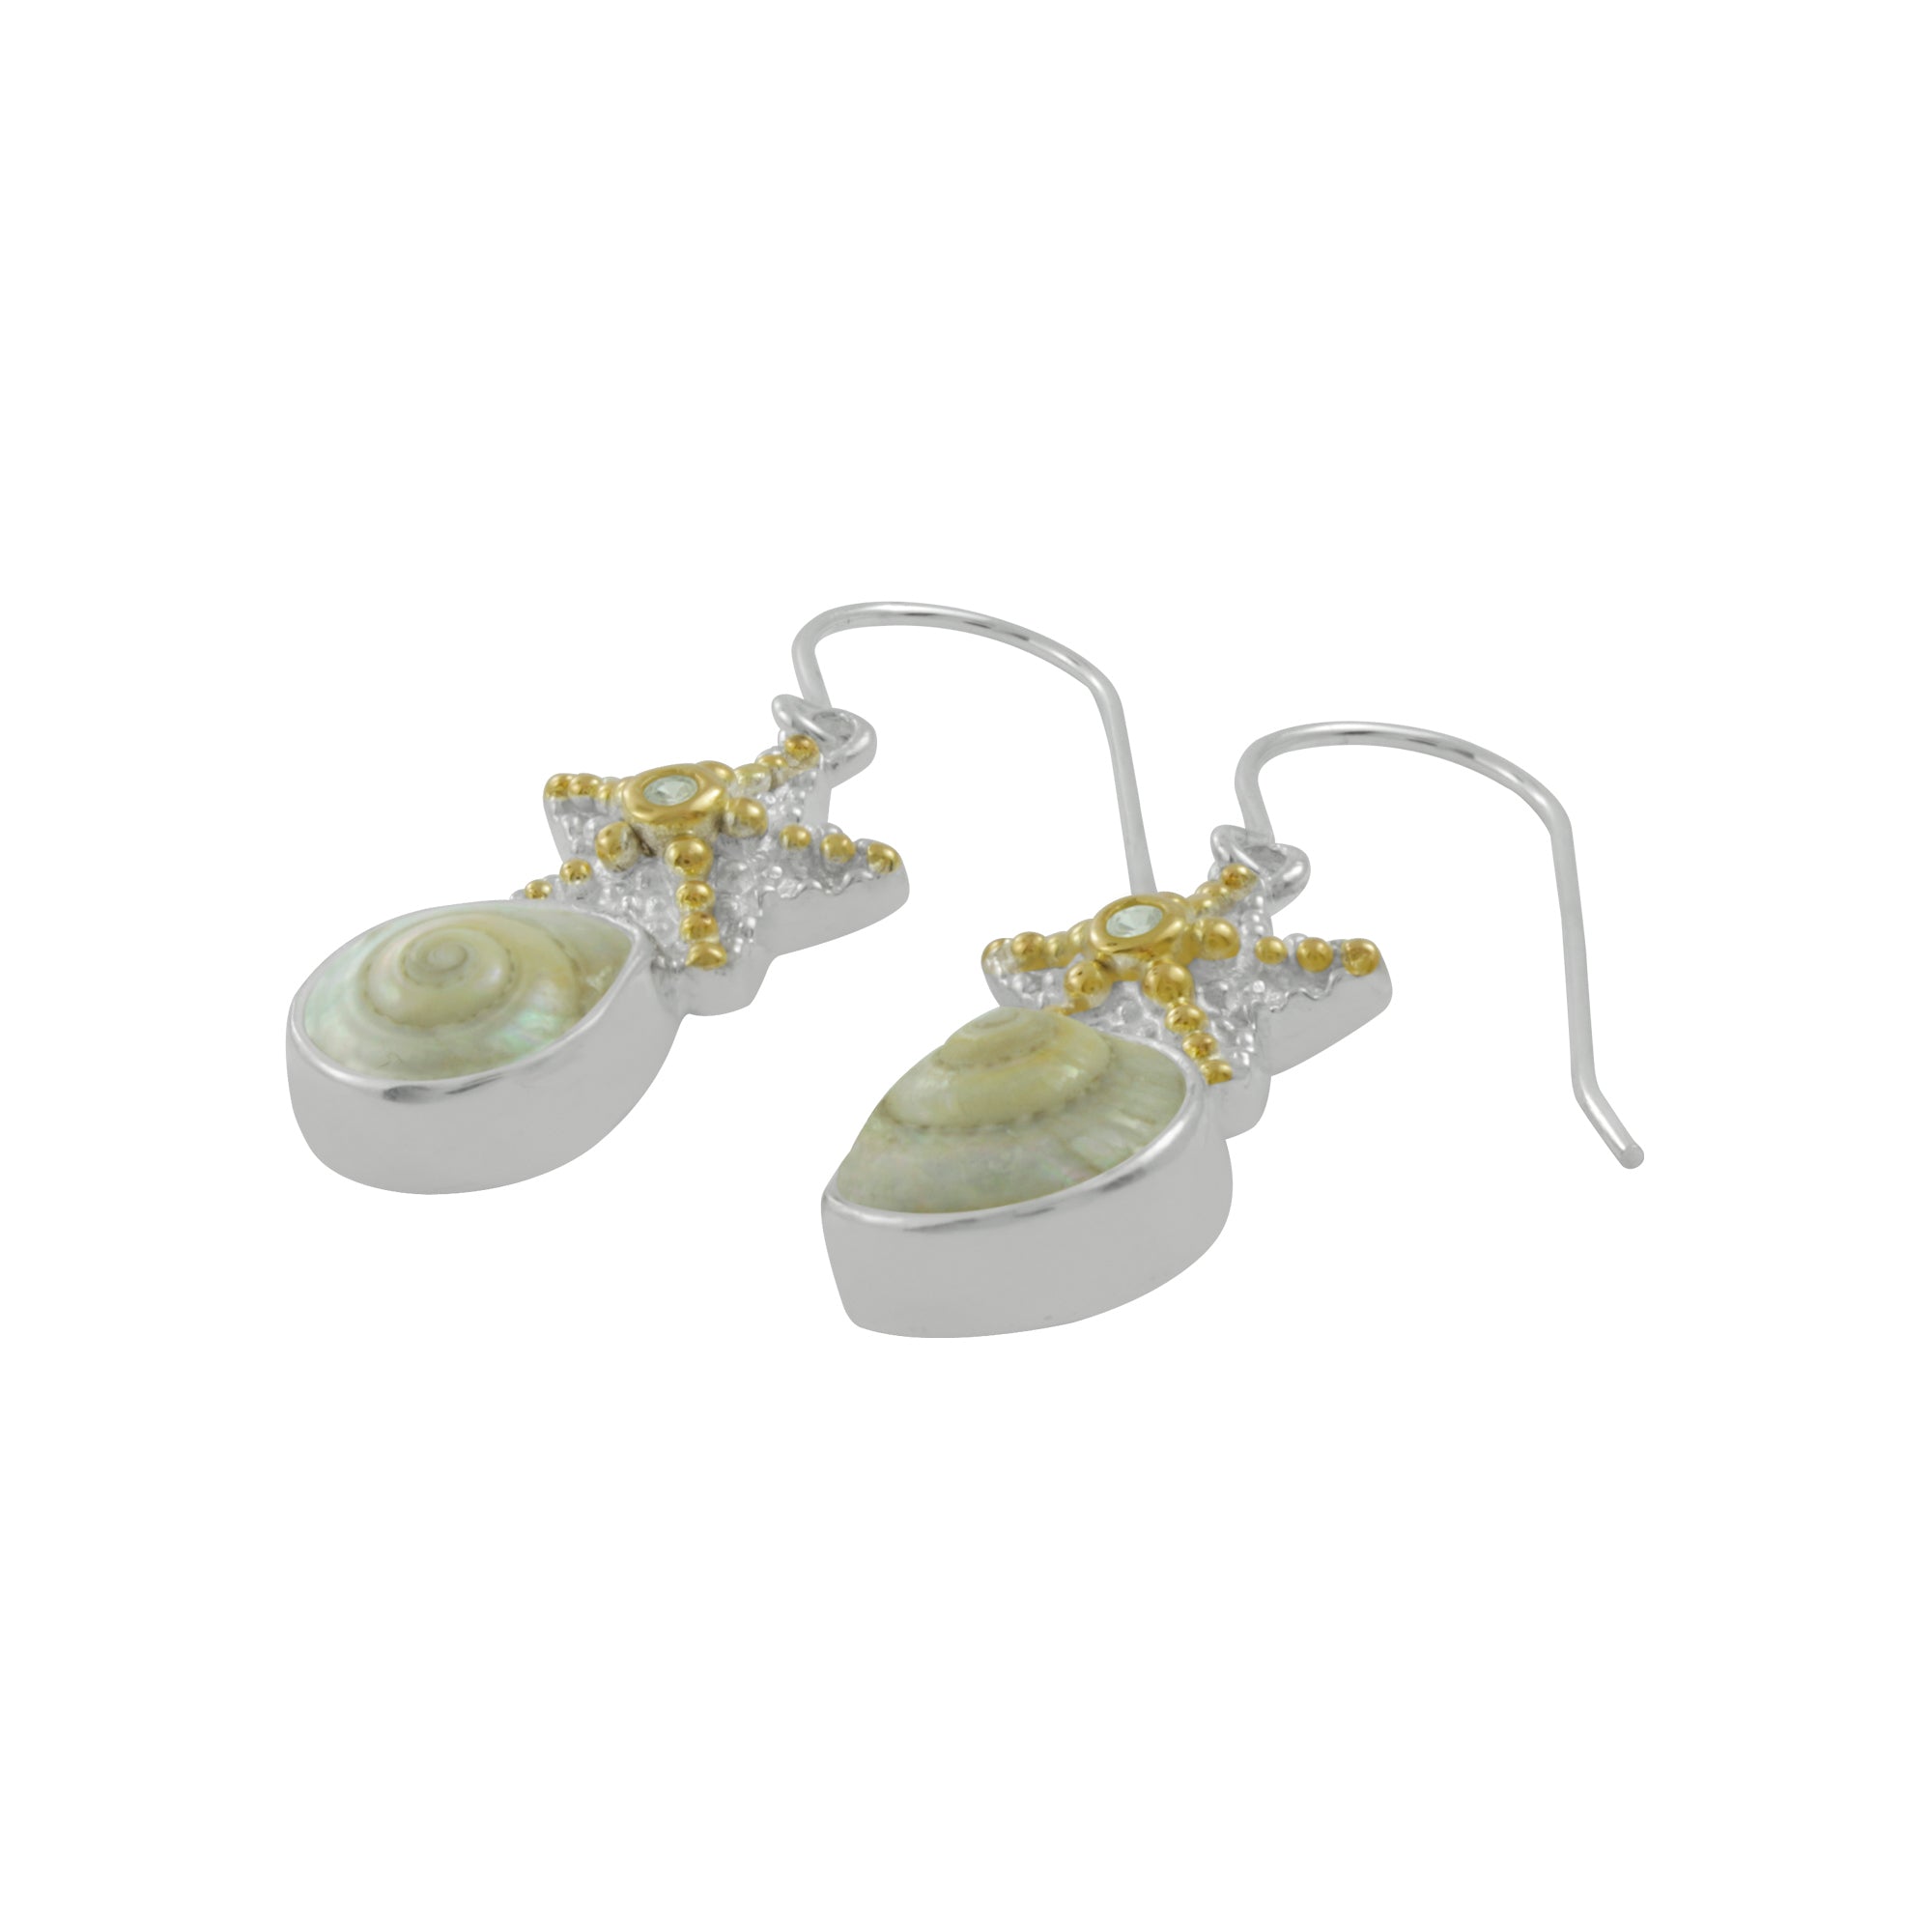 Silver Earring Star Component With Shell Malabar Turbo And White Cubic Zirchonia Round Facet